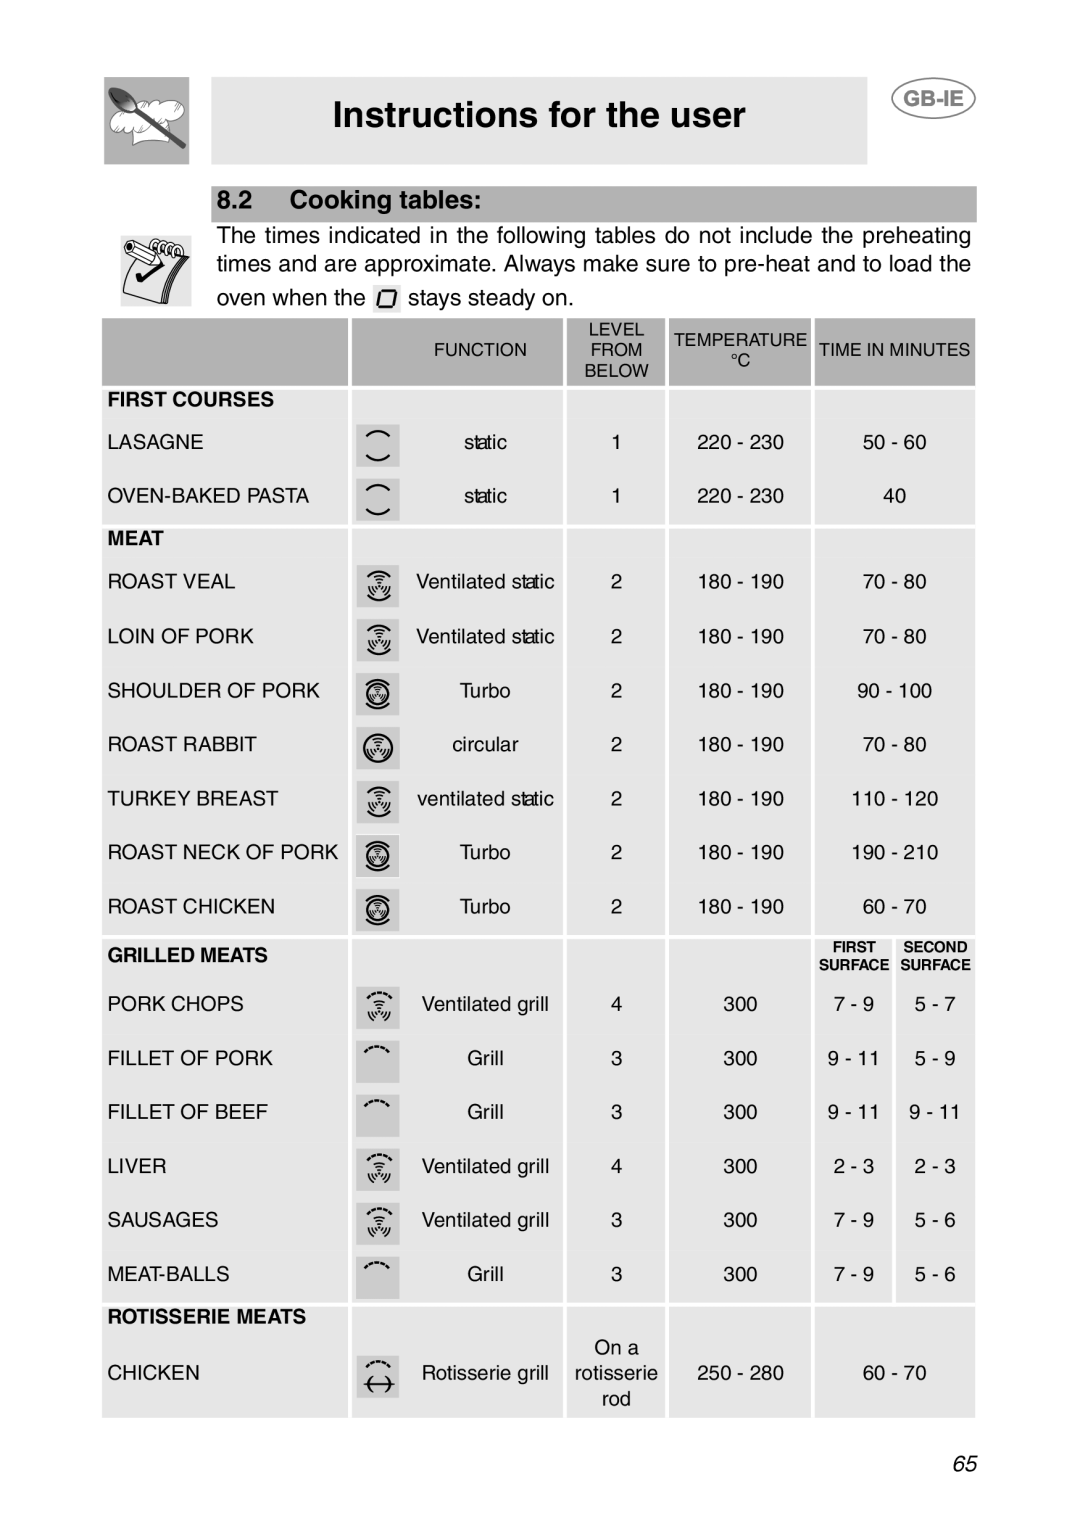 Smeg SC112-2 manual Cooking tables, Instructions for the user, First Courses, Grilled Meats, Rotisserie Meats 